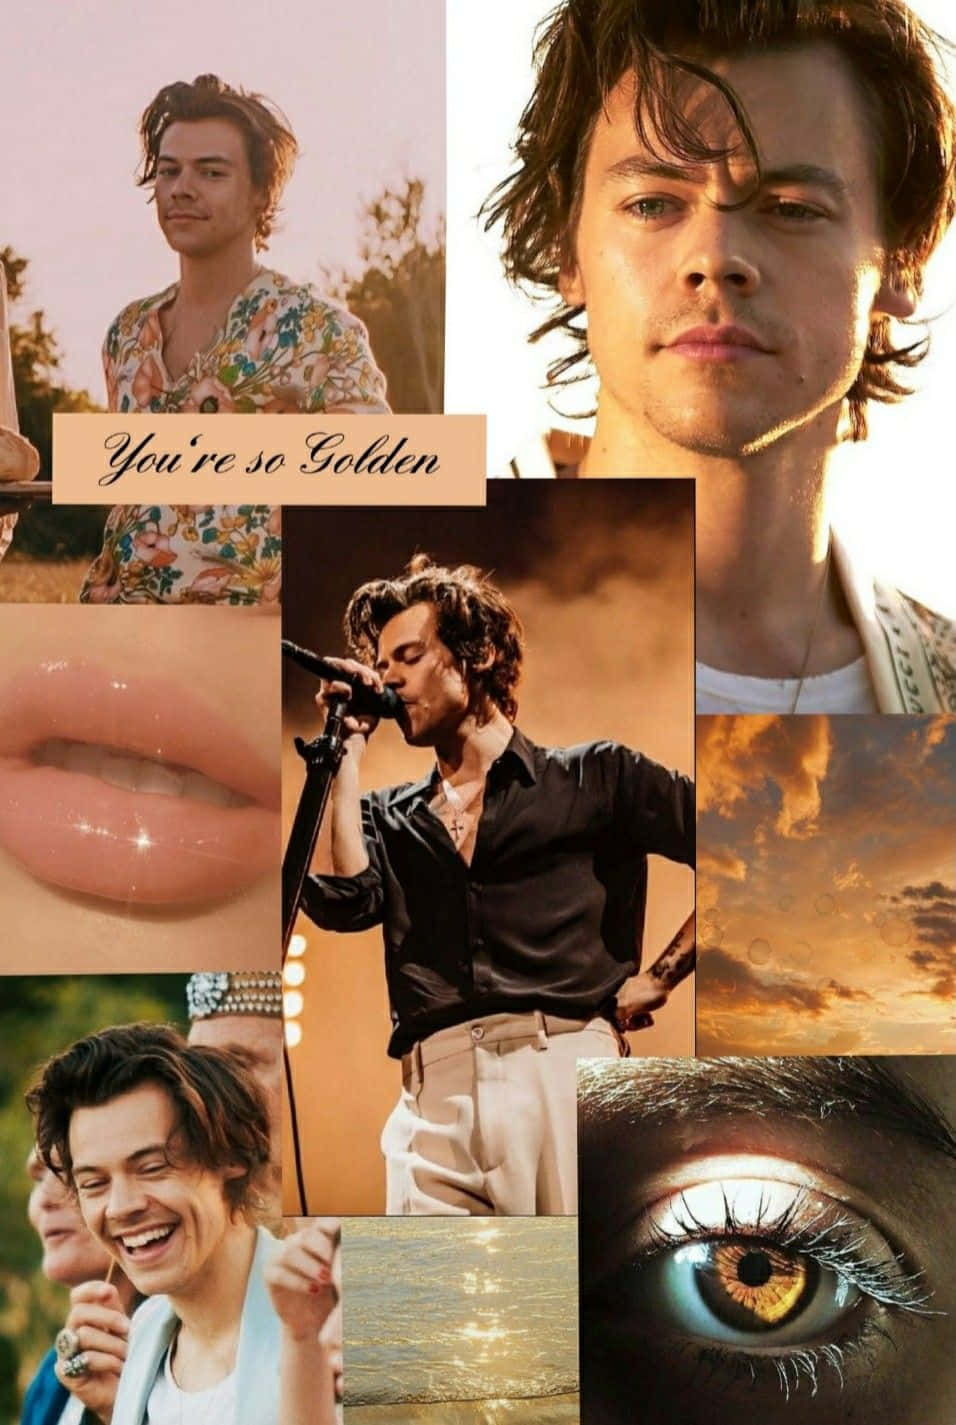 Free Harry Styles Collage Wallpaper Downloads, Harry Styles Collage Wallpaper for FREE